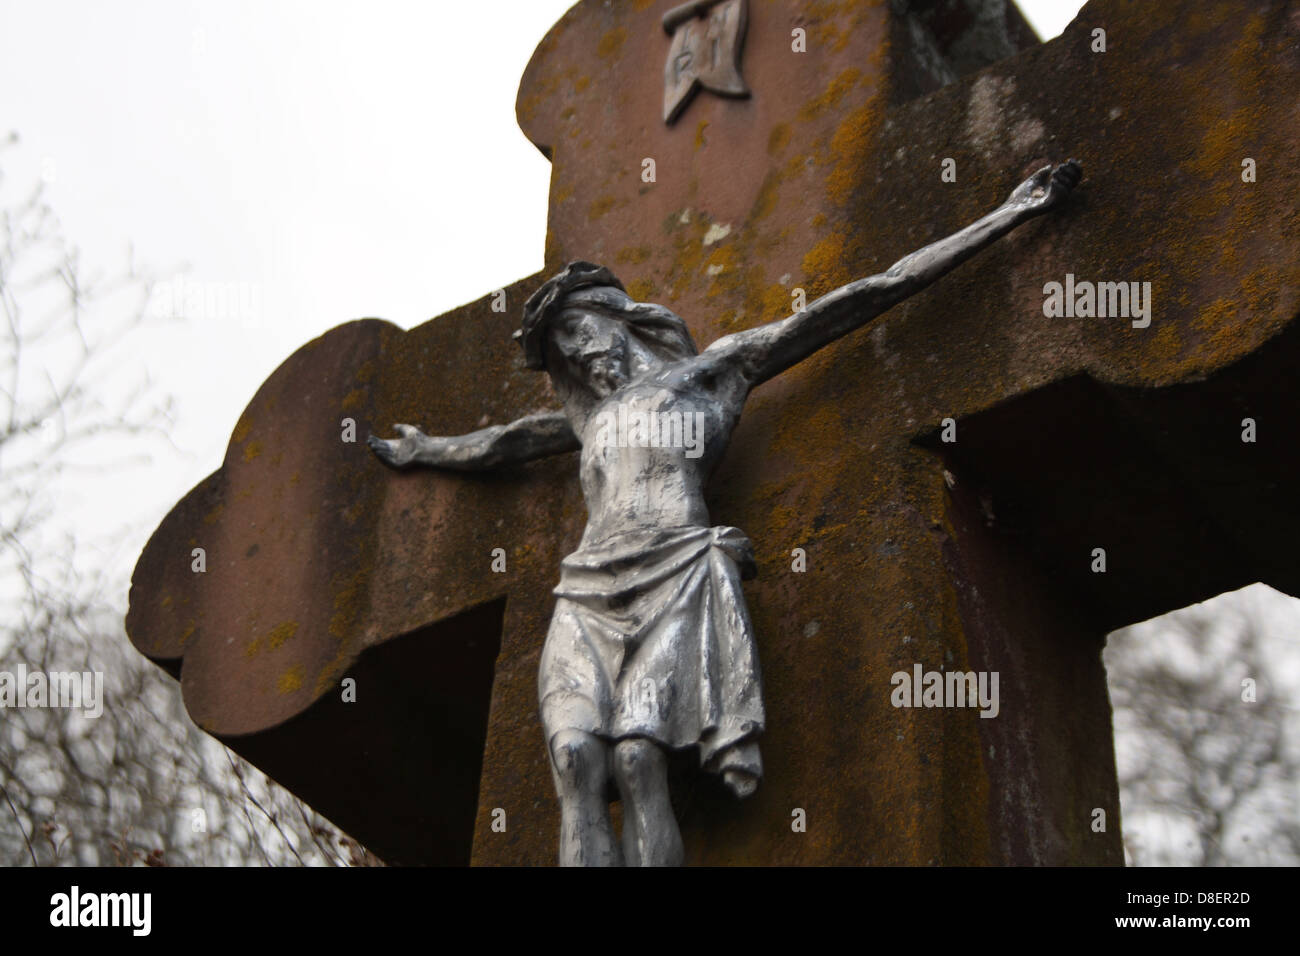 A sculpture of Jesus' crucifixion on the cross. Stock Photo